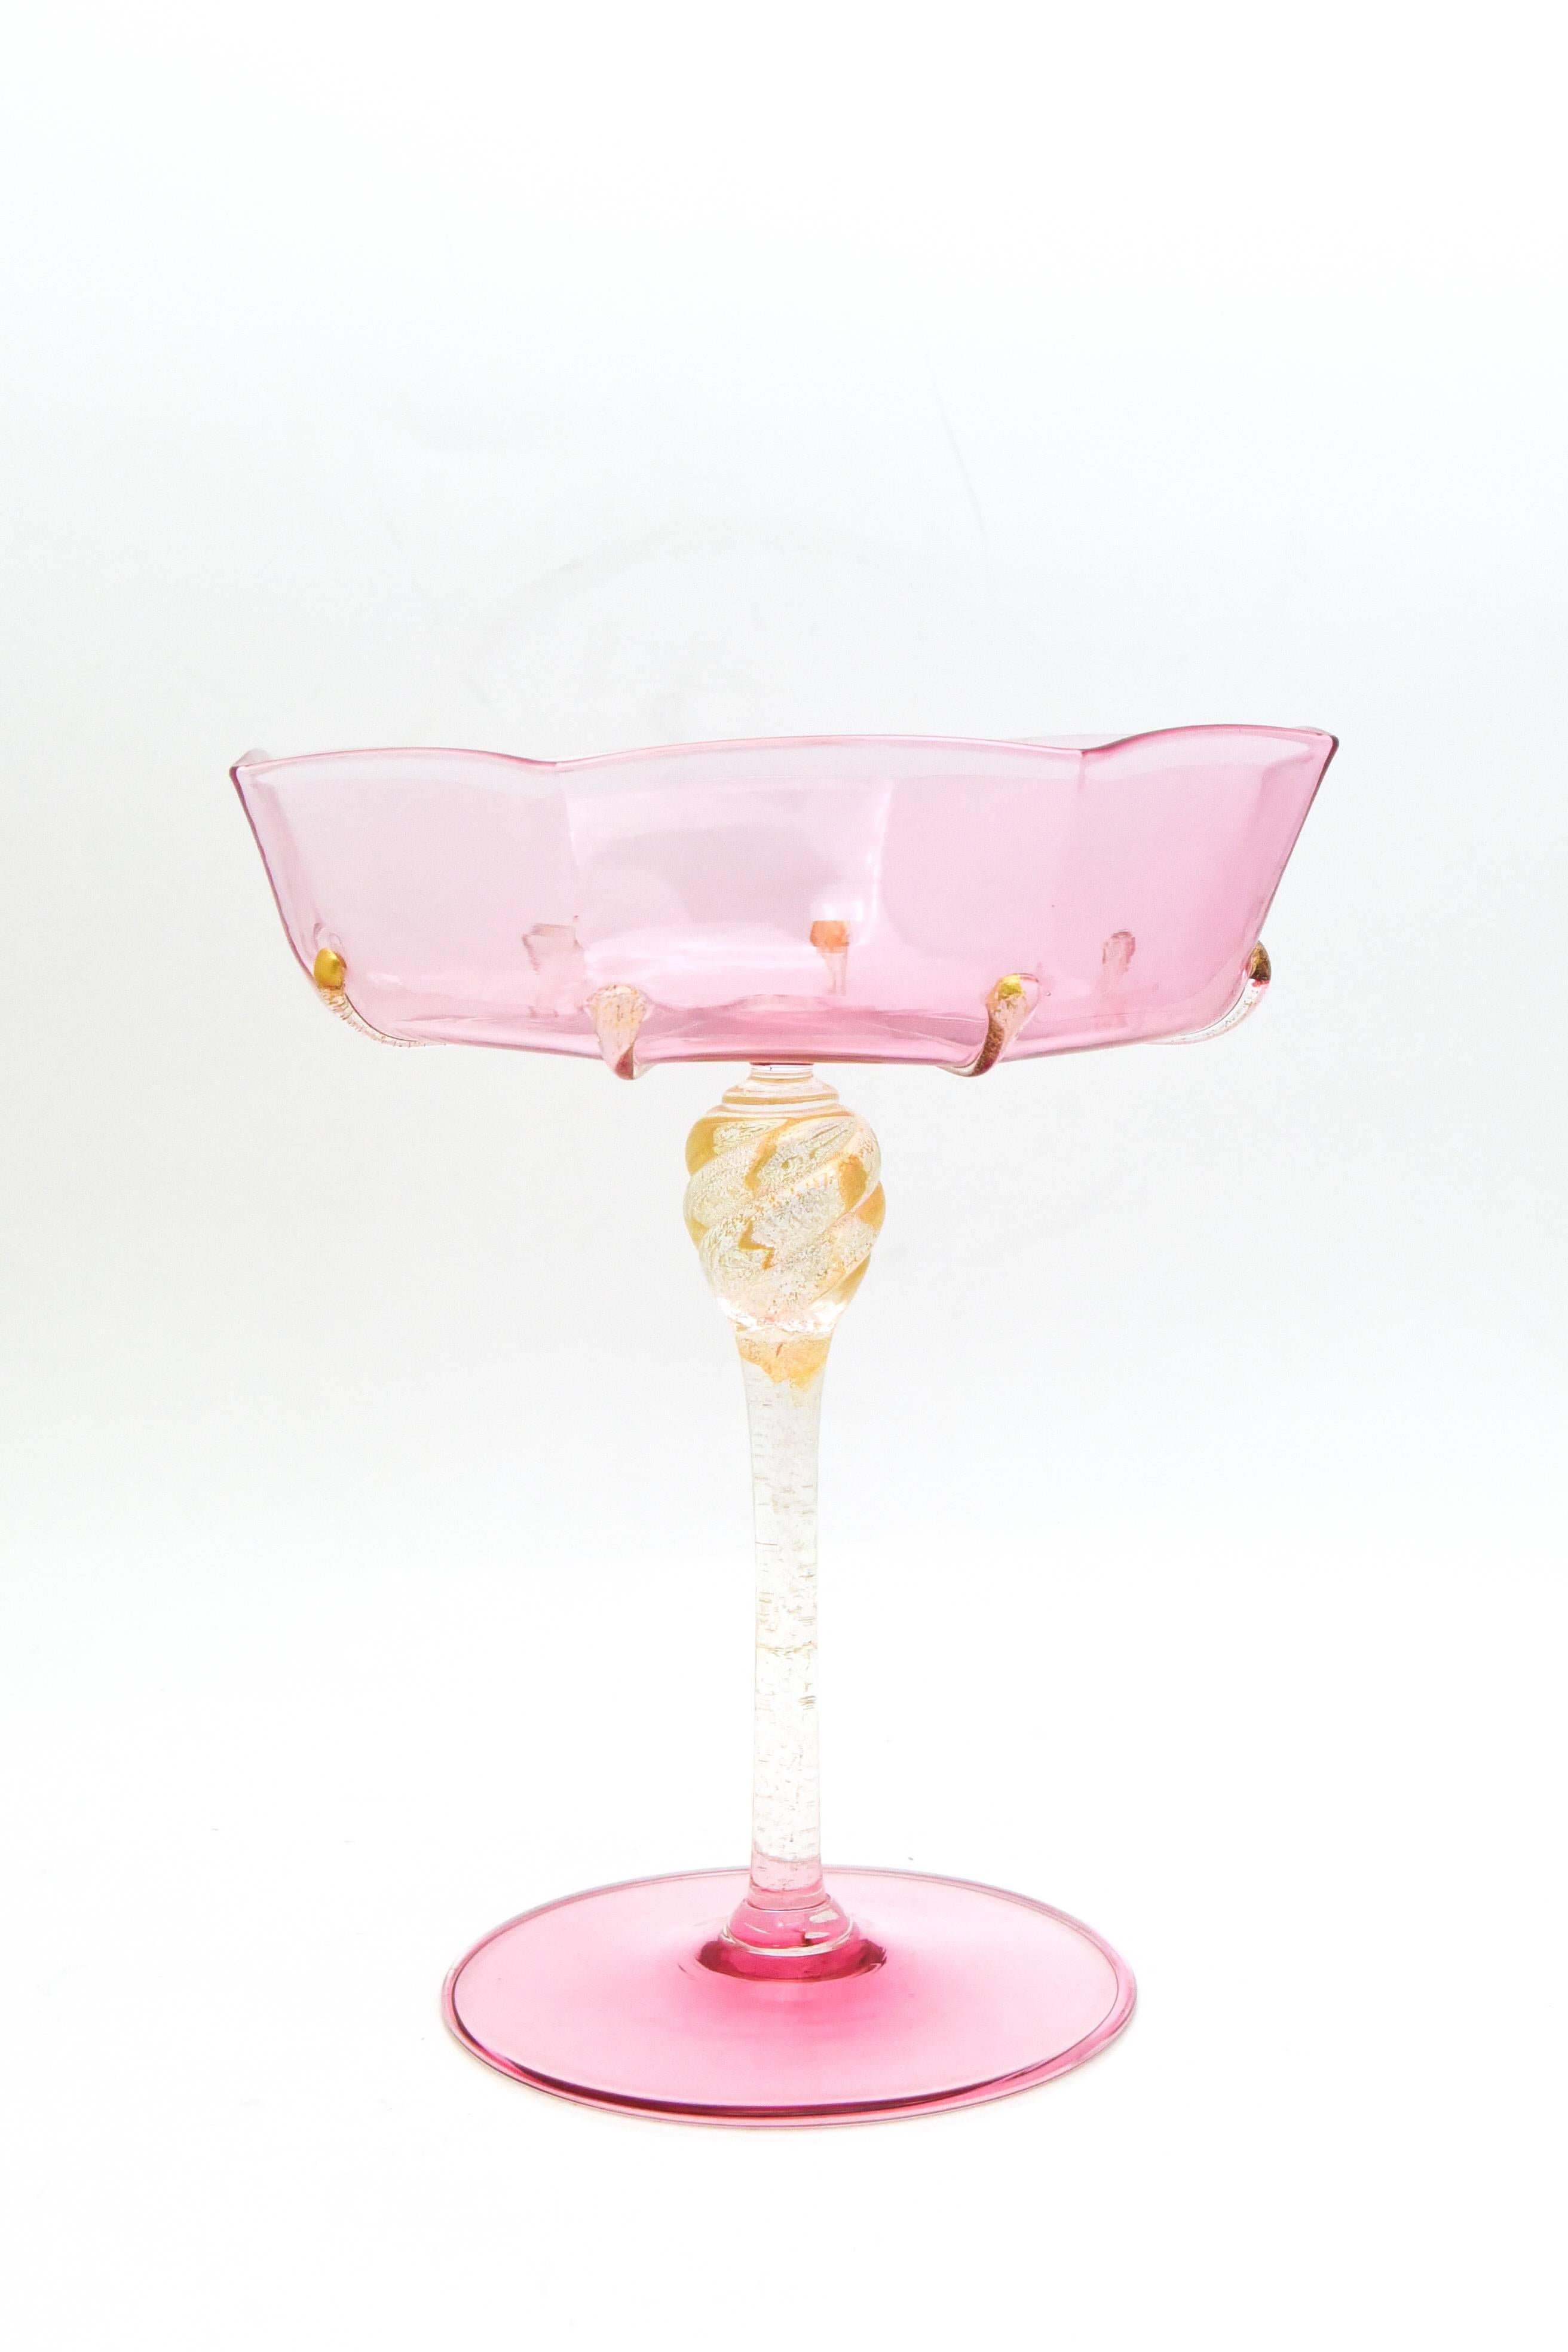 Glass Salviati Venetian Complete Table Service for 12 Handblown Pink and Gold Goblets